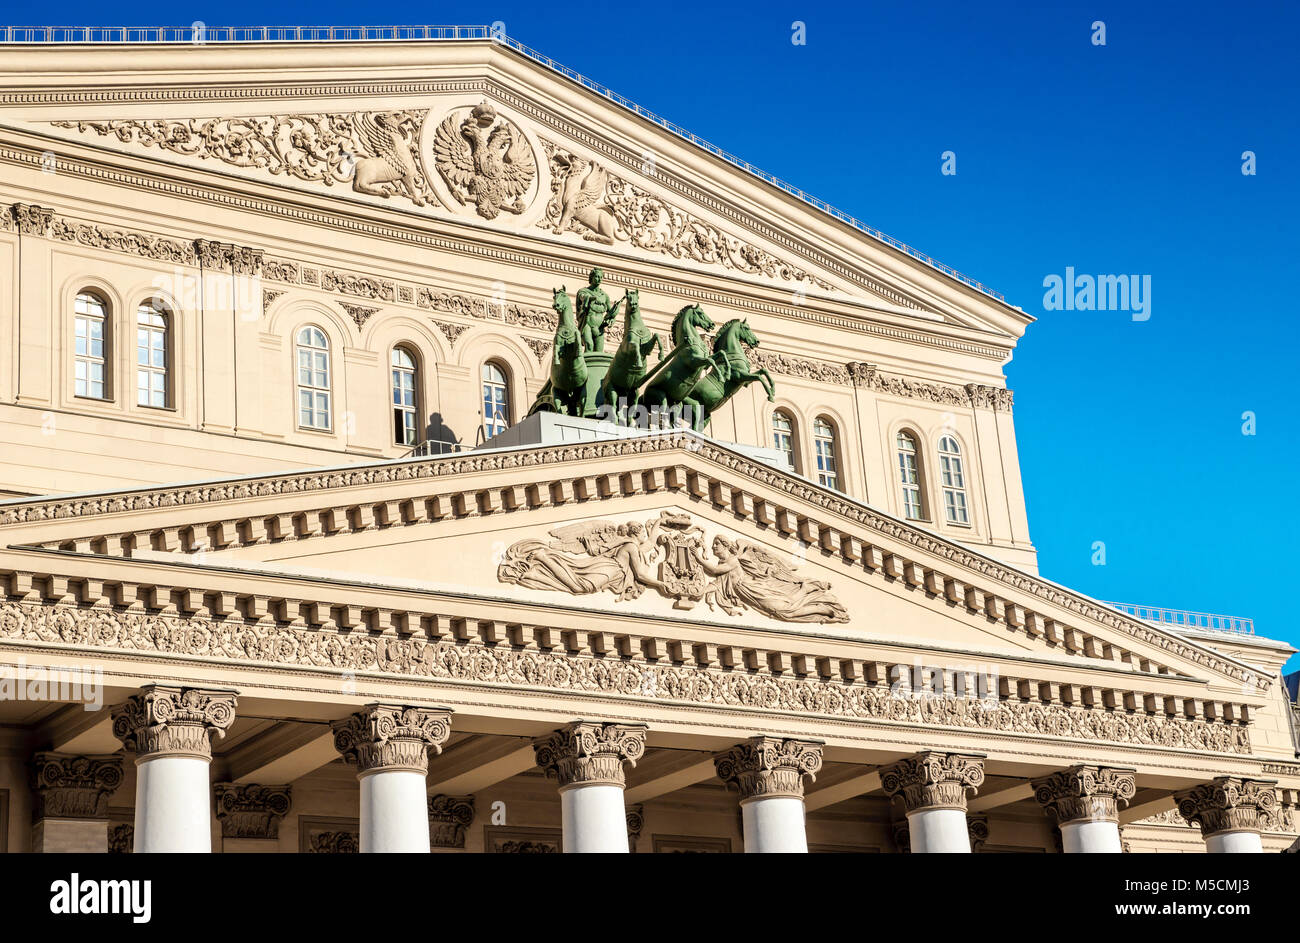 The Quadriga on the Bolshoi theater in Moscow, Russia Stock Photo